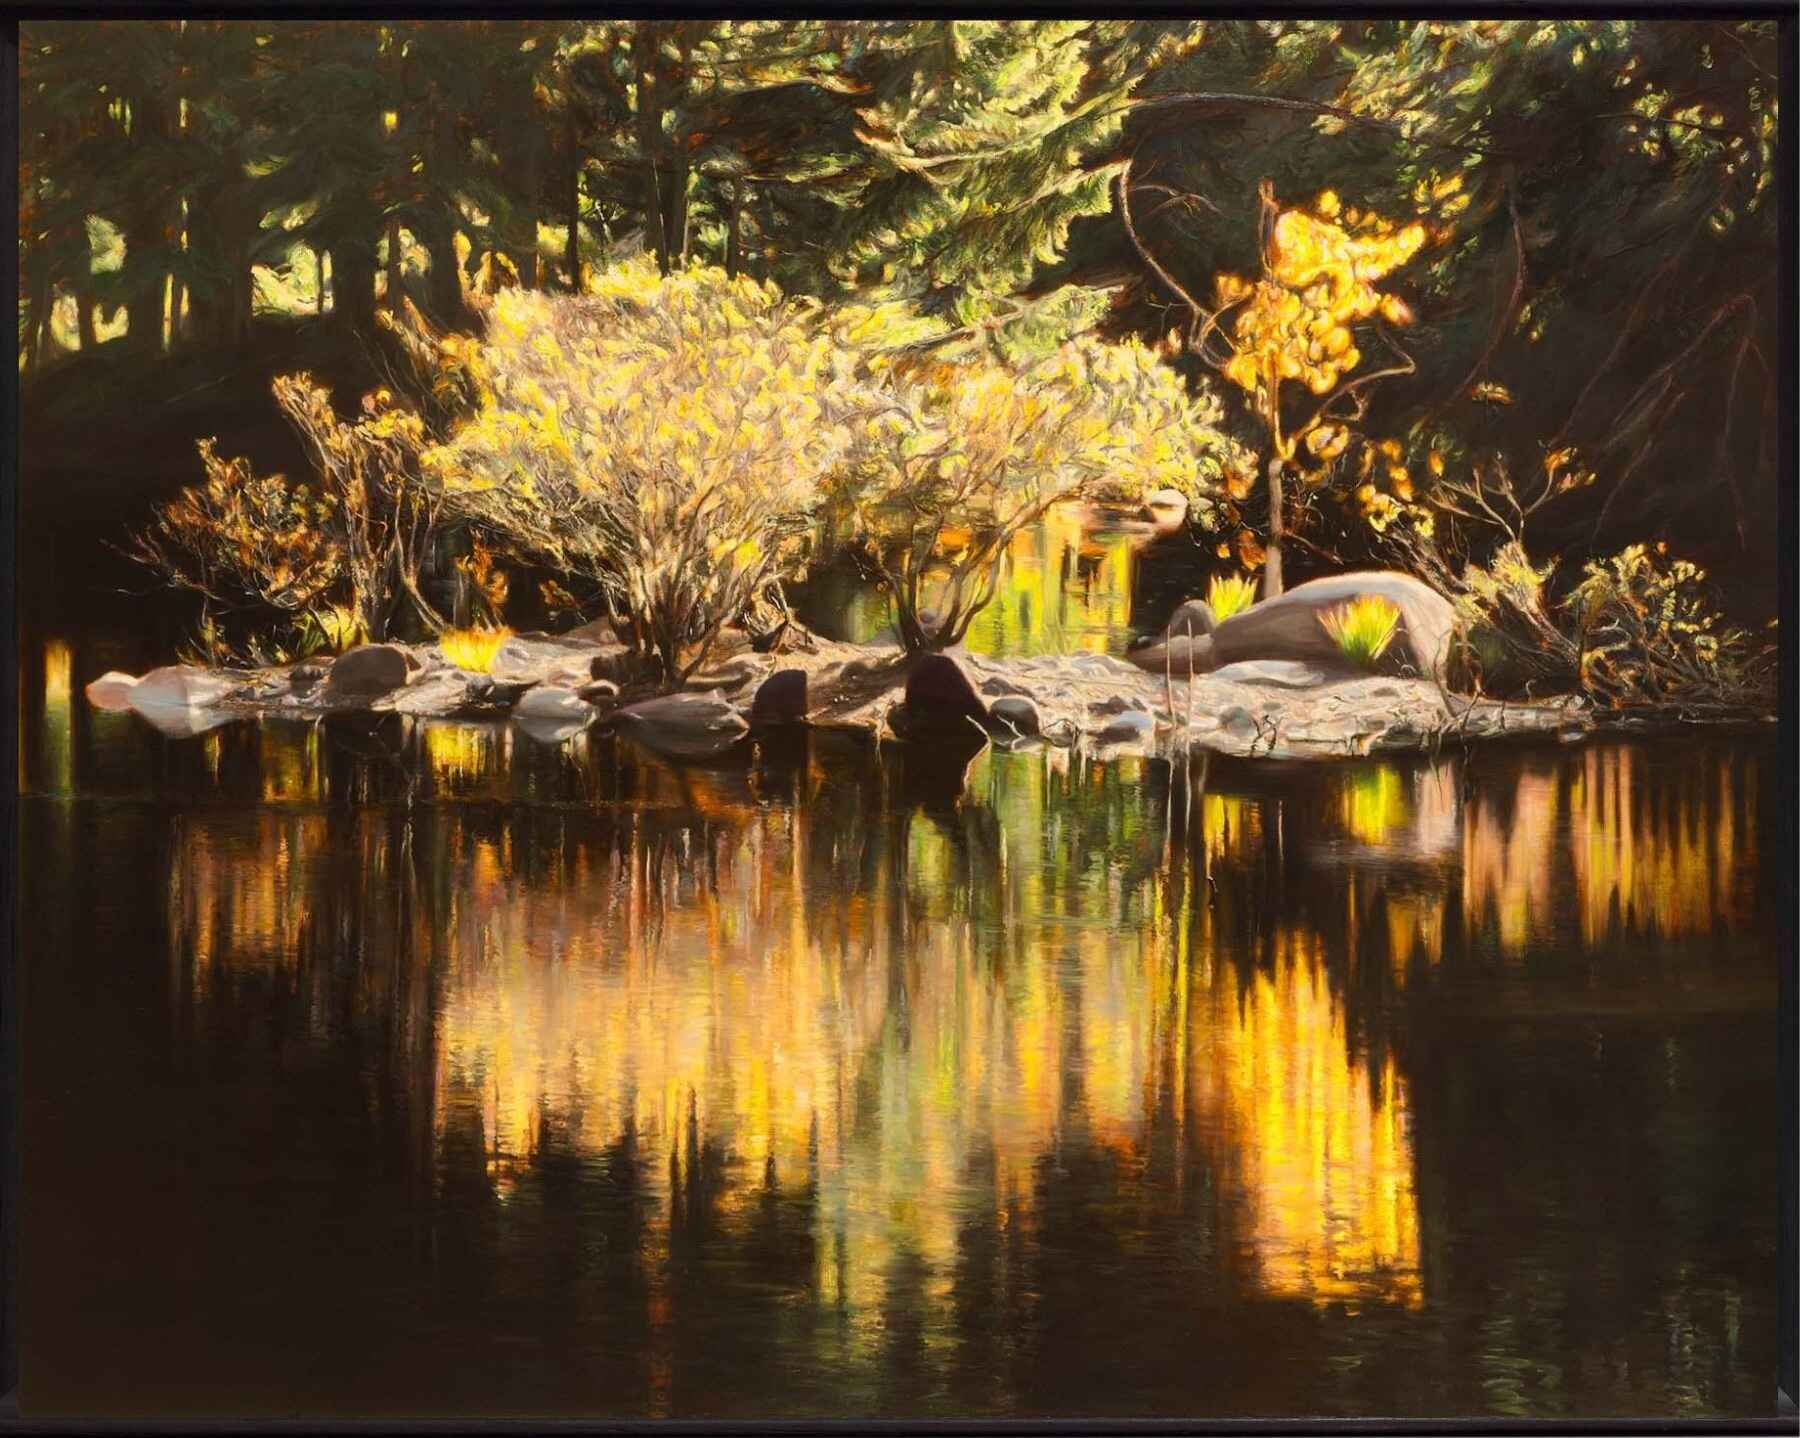 Contemporary art. Title: Dark Waters Rice Lake, Oil on Canvas, 54x68 in by Canadian artist Paul Chizik.